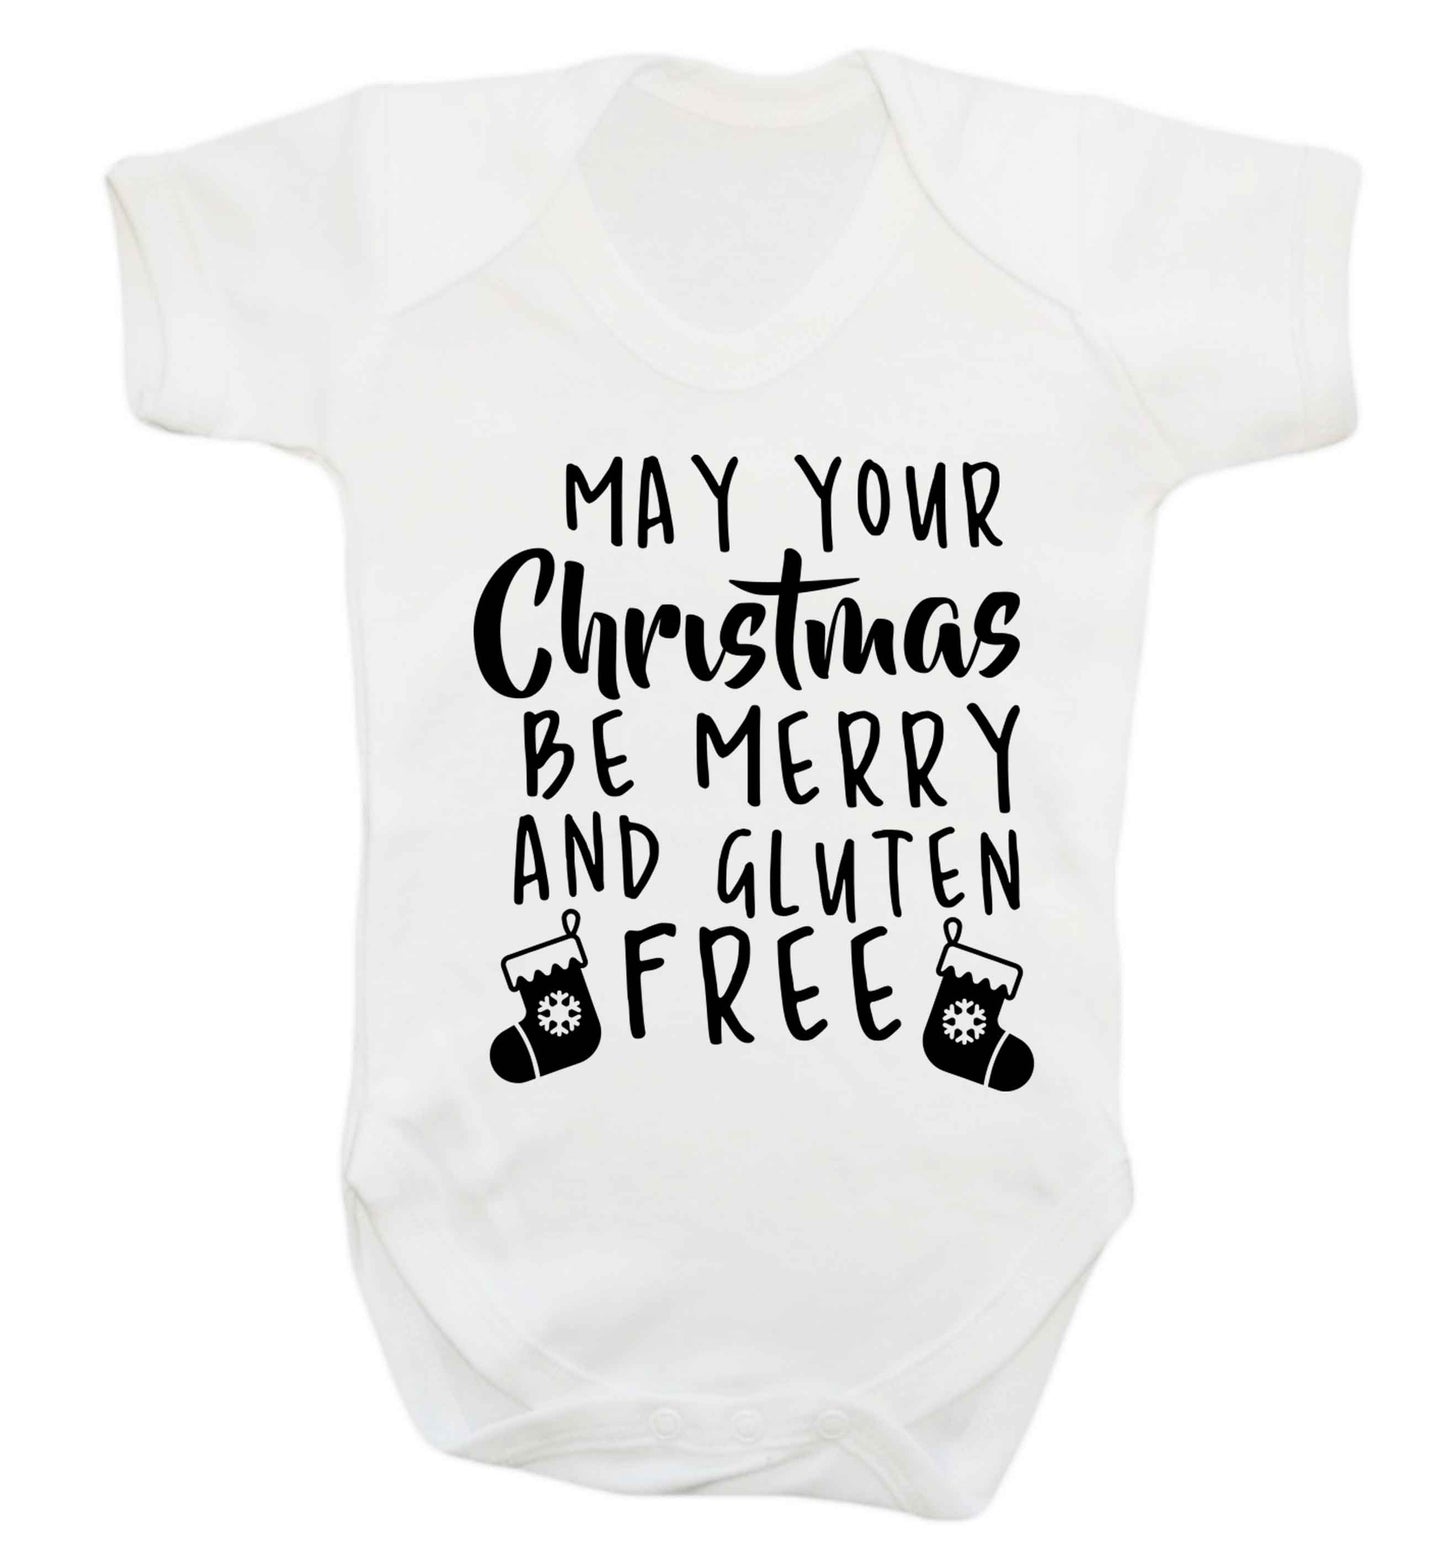 May your Christmas be merry and gluten free Baby Vest white 18-24 months